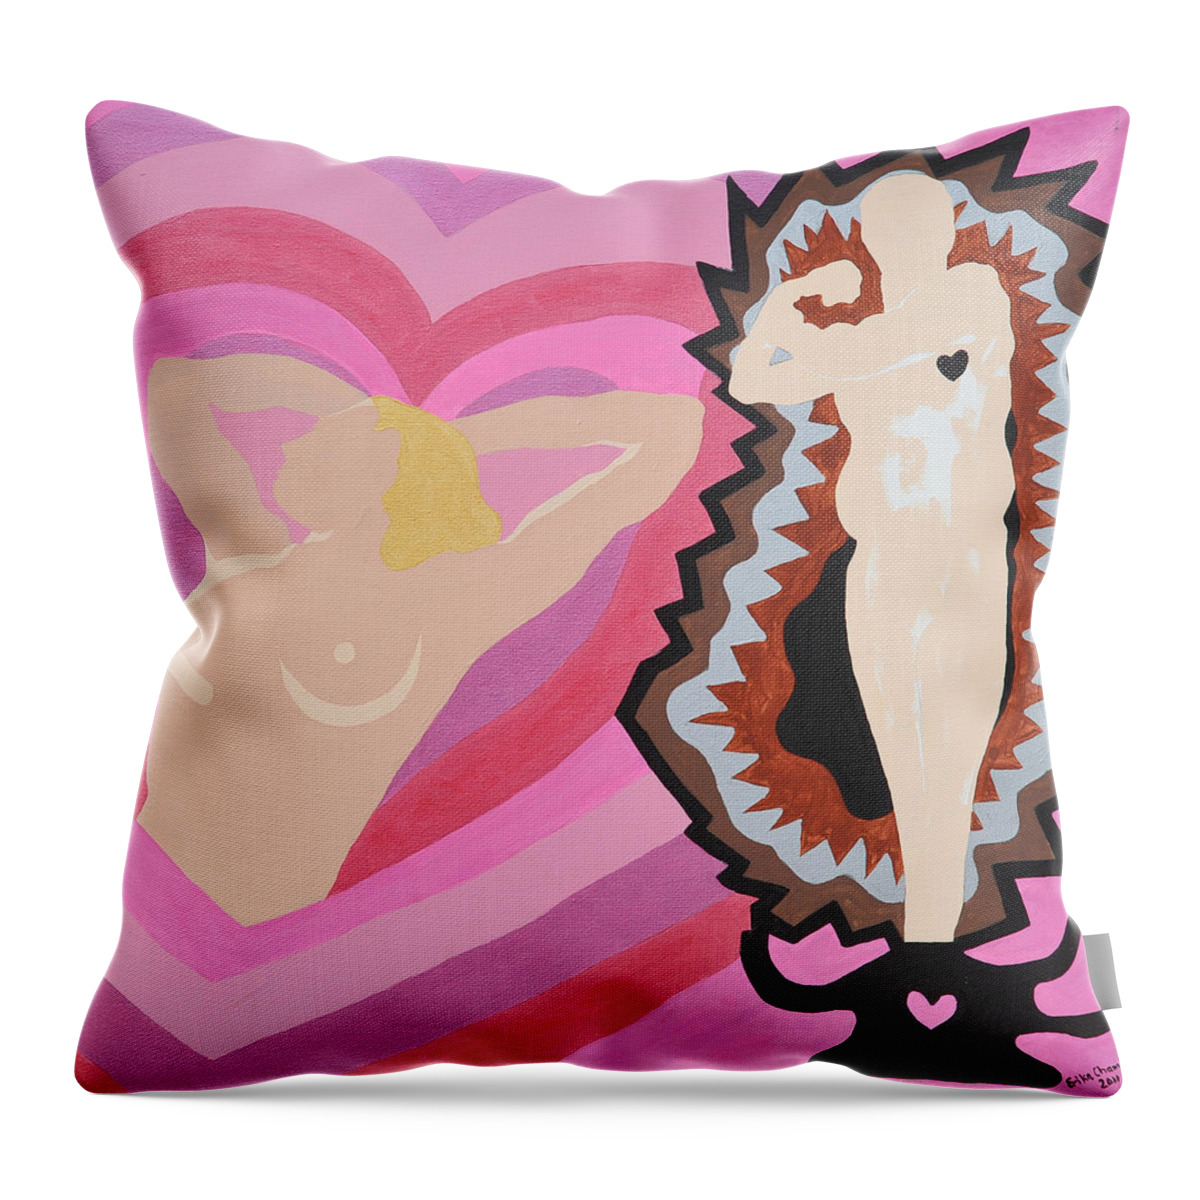 Genie Throw Pillow featuring the painting Black Hearted by Erika Jean Chamberlin